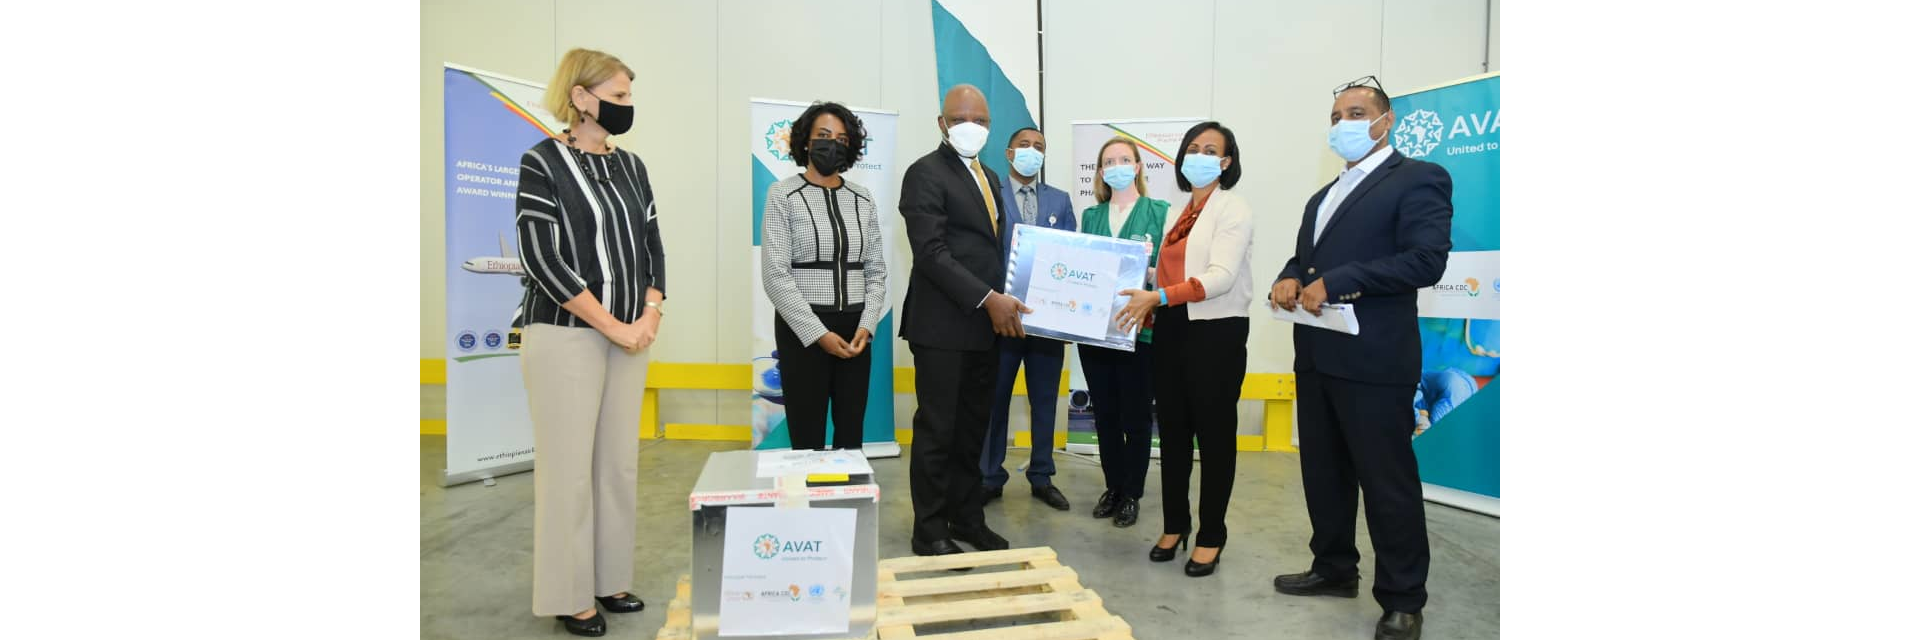 108,000 doses of COVID-19 vaccine delivered to Ethiopia